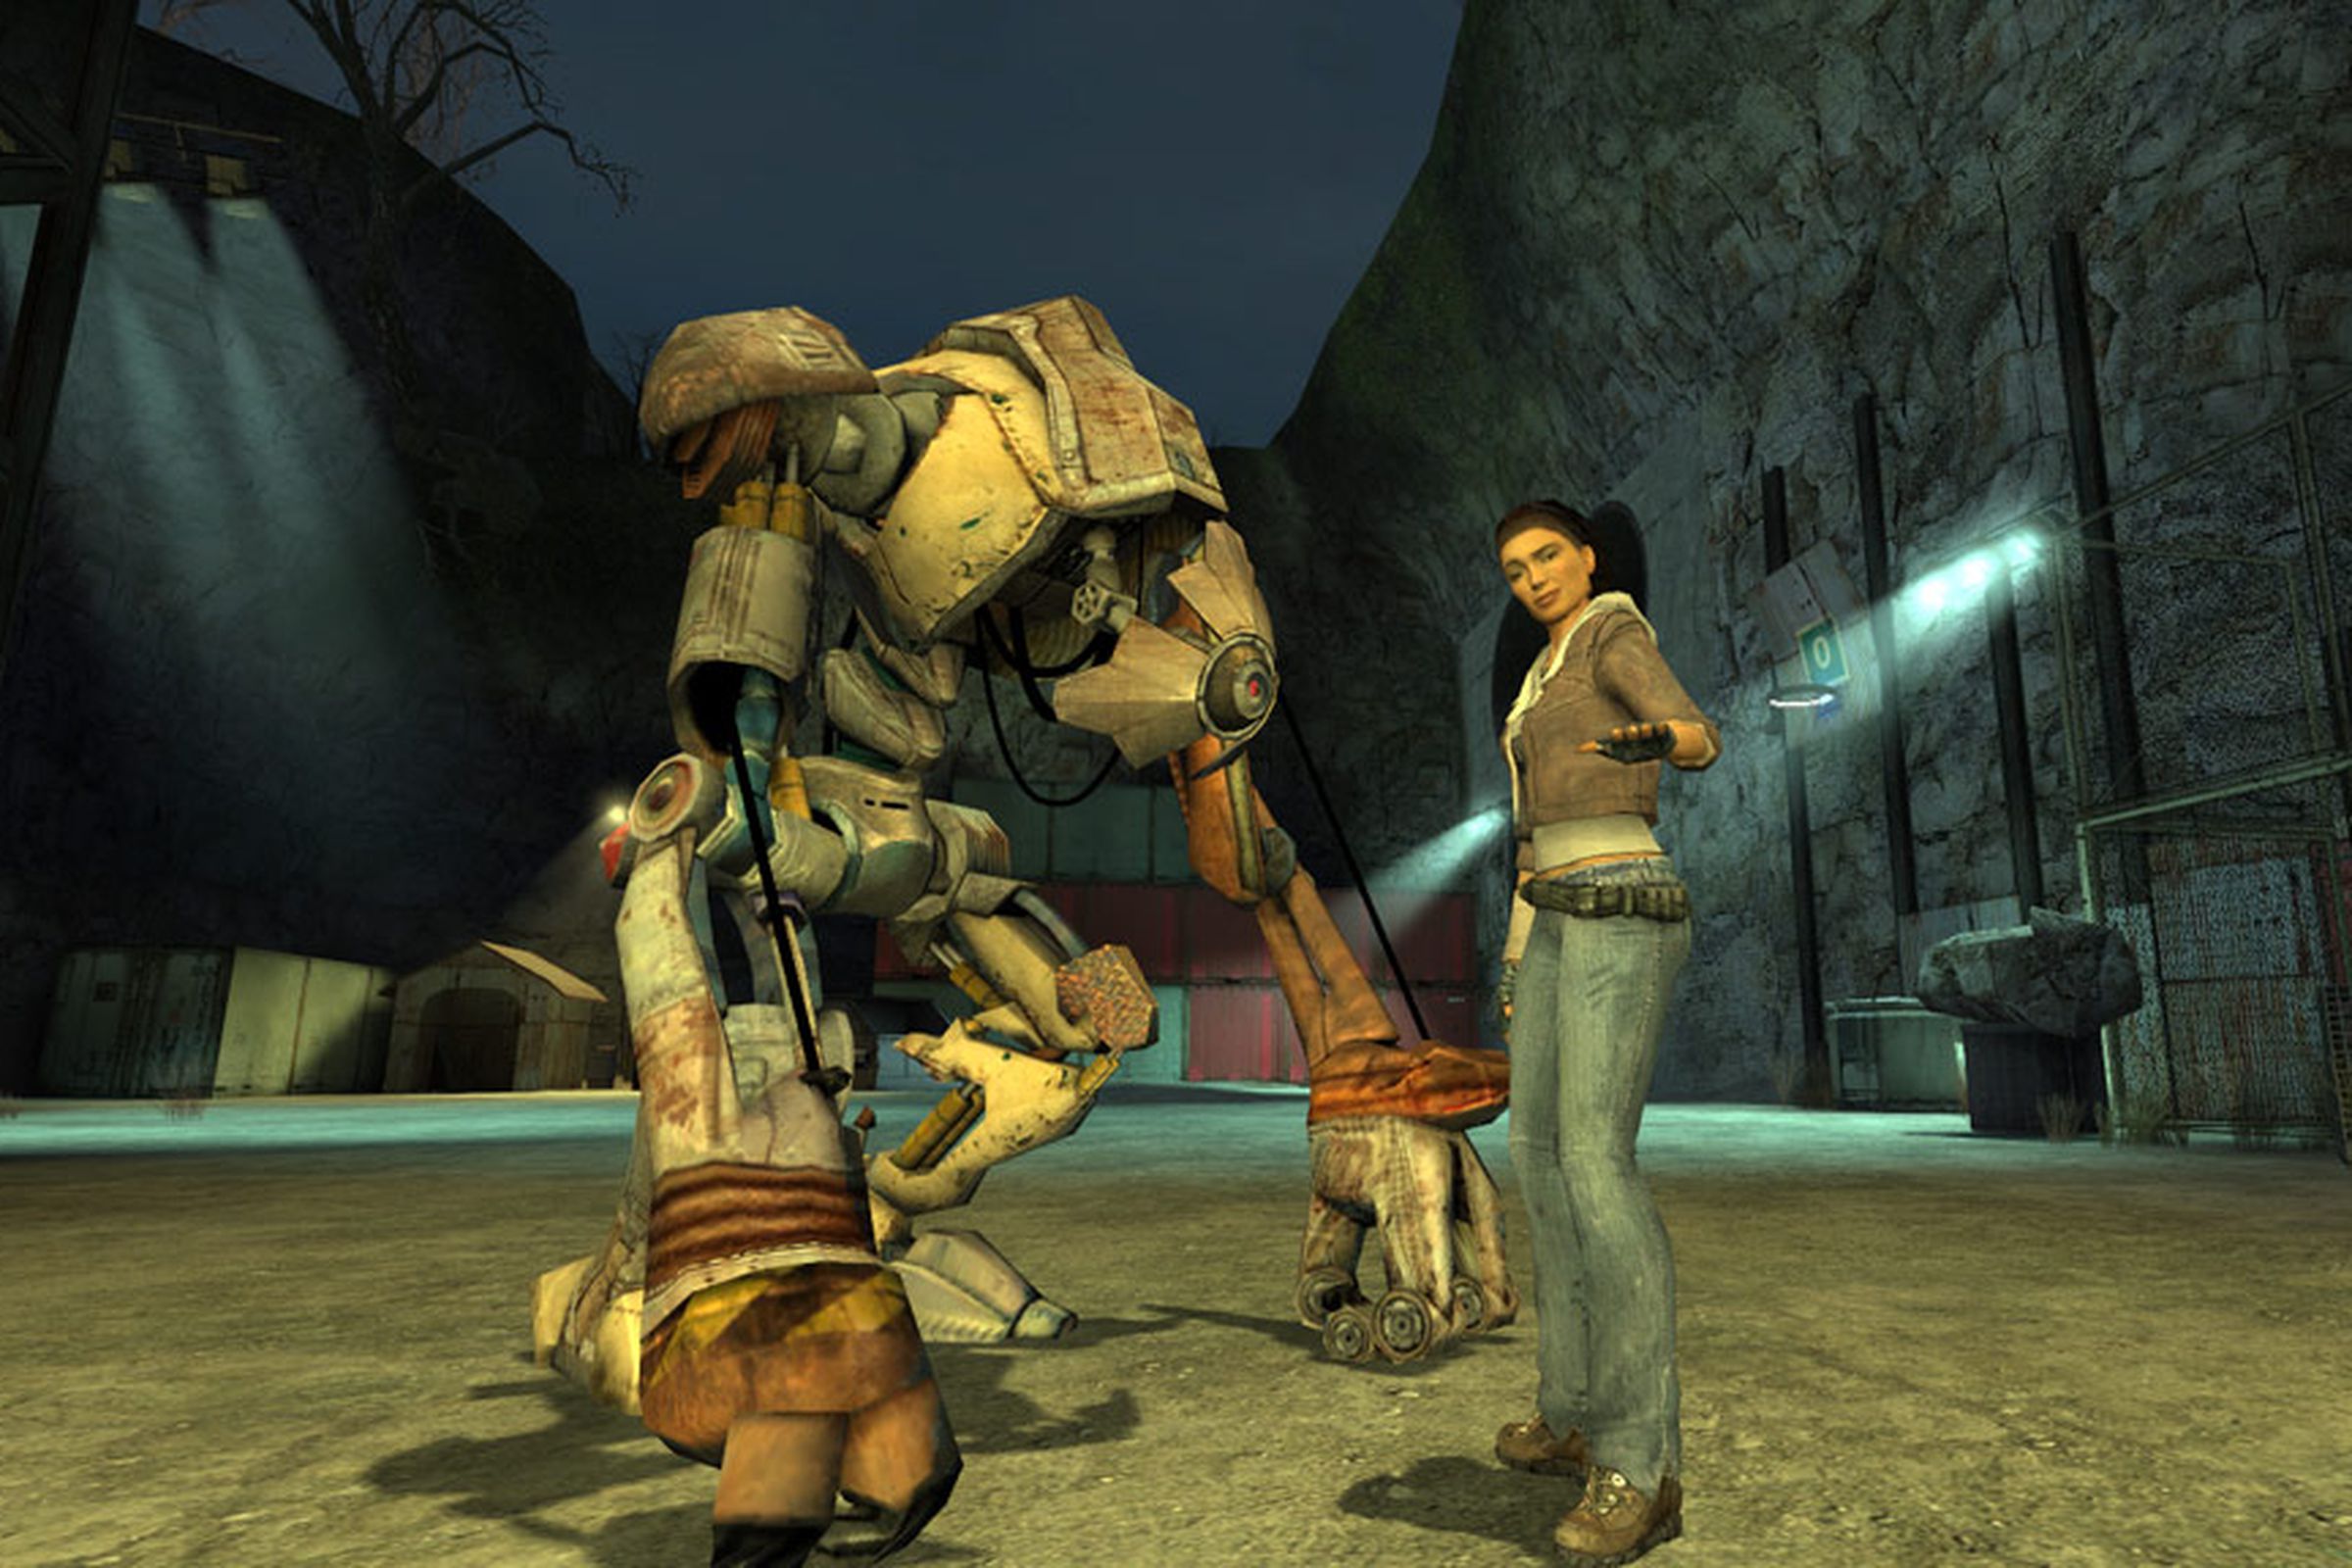 A screenshot from Half-Life 2 with Alyx and Dog